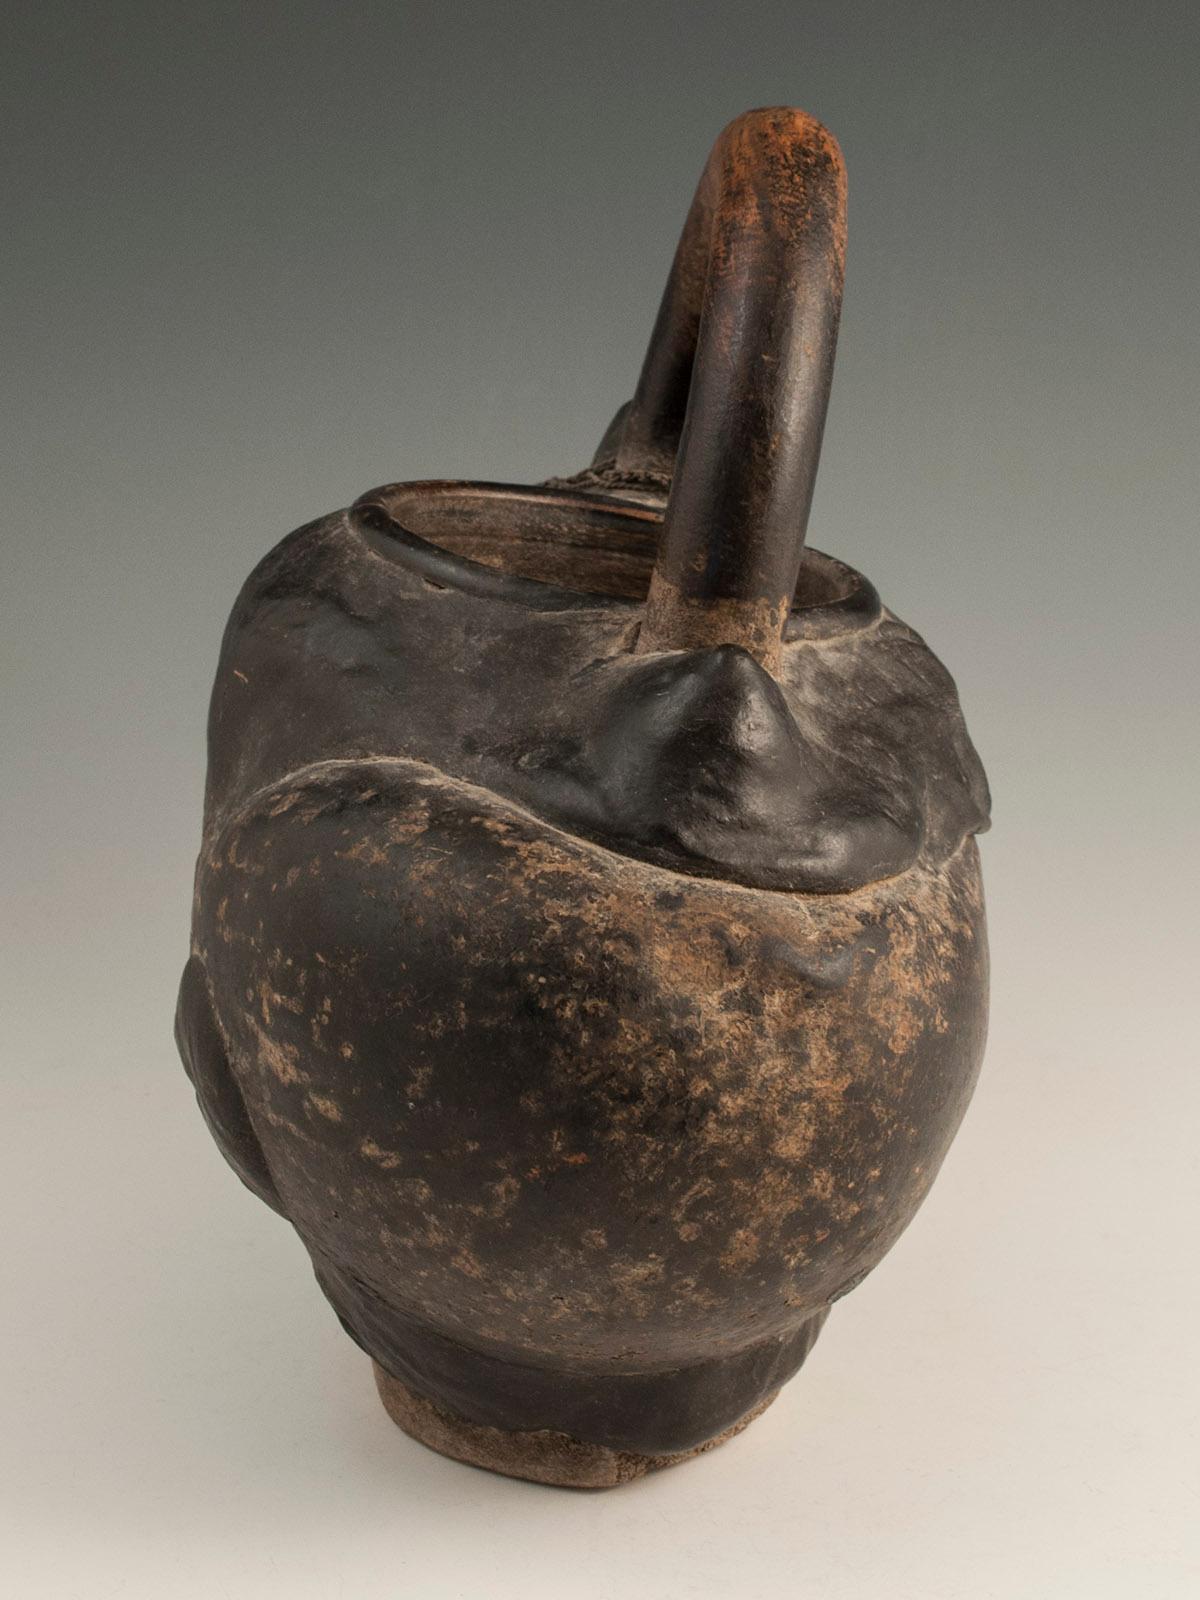 Hand-Crafted Late 19th to Early 20th Century Tribal Sadhu's Coco De Mer Kashkul, India